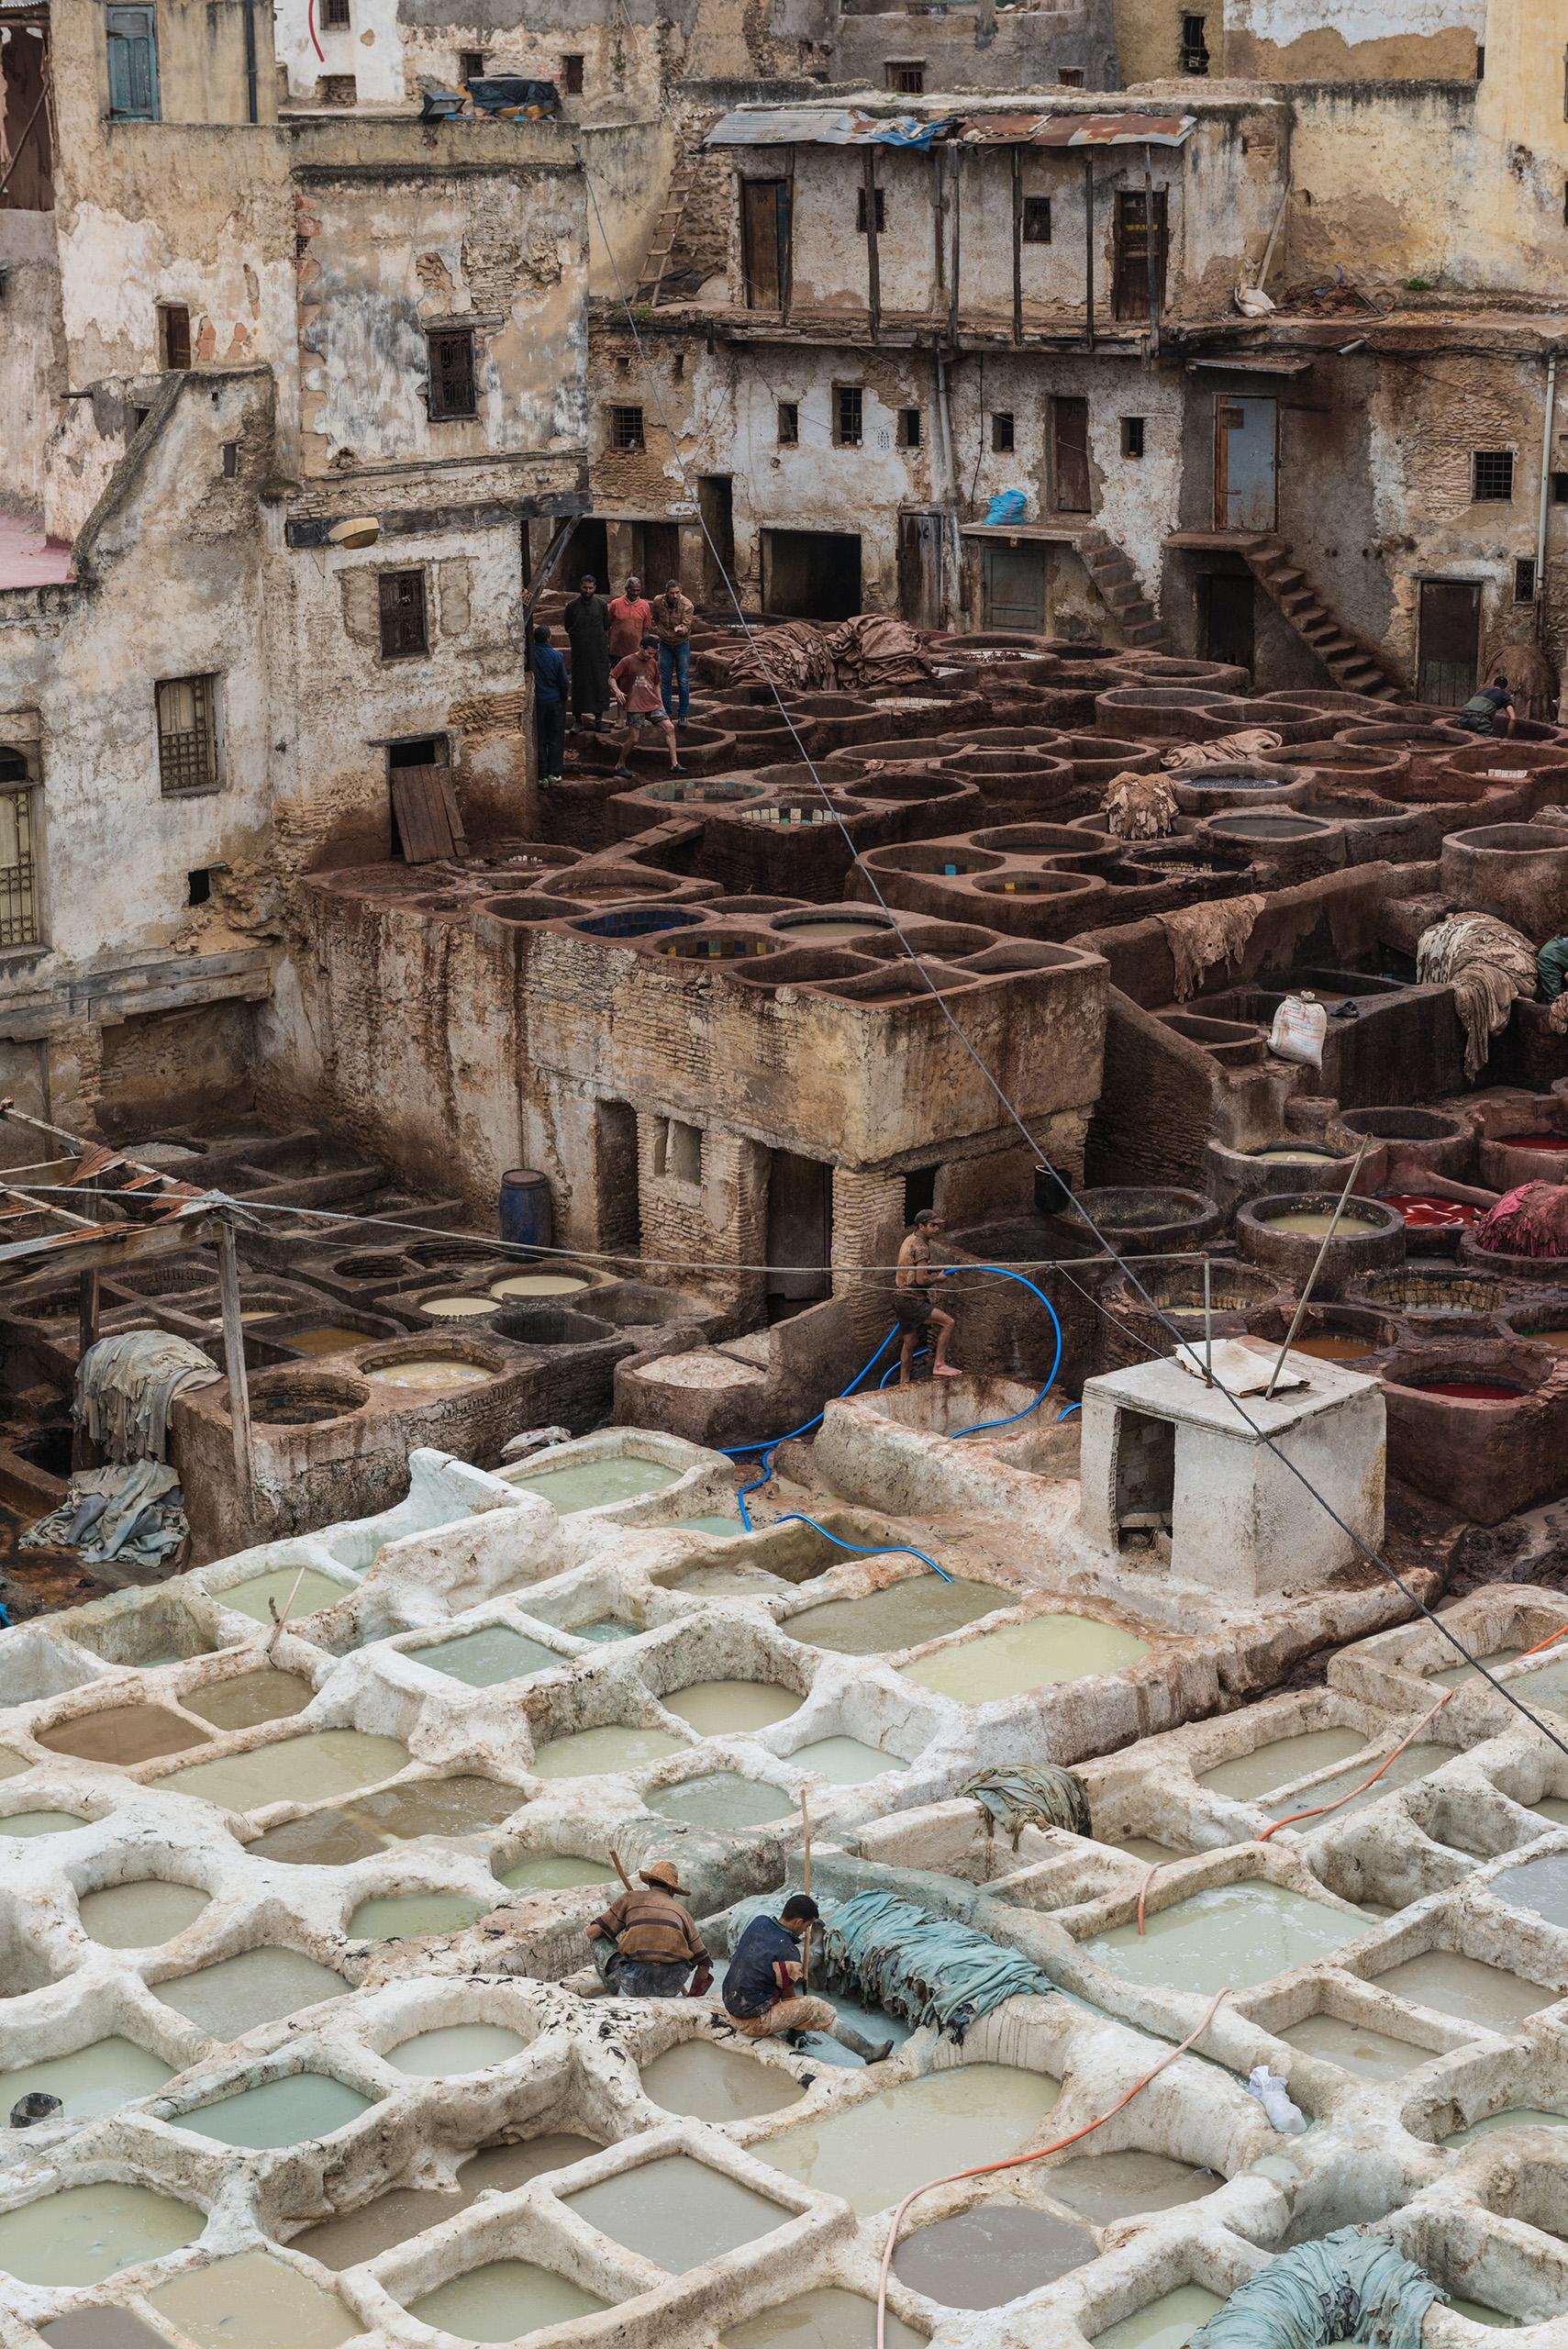 Image of Fes Tanneries by Luka Esenko